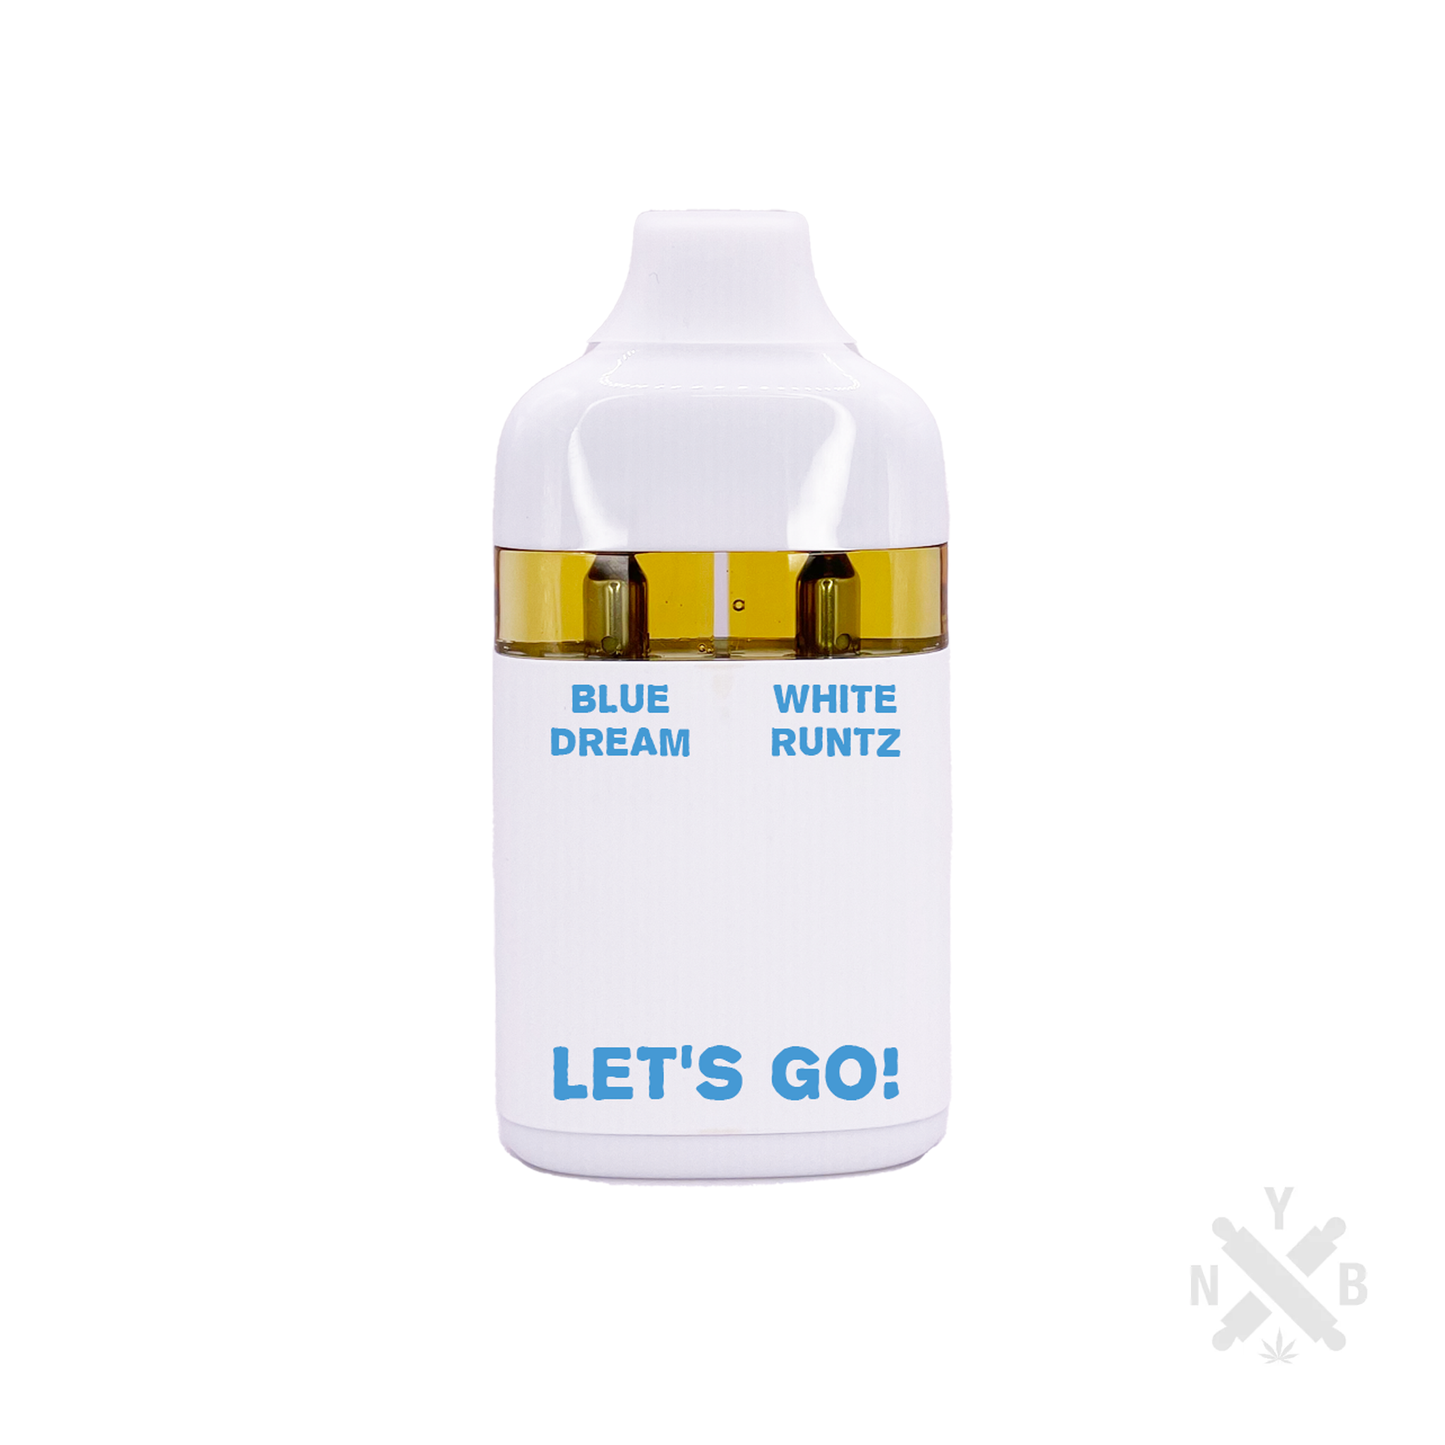 Let's Go! 6000mg Takeoff Blend THC | 6ml Disposable